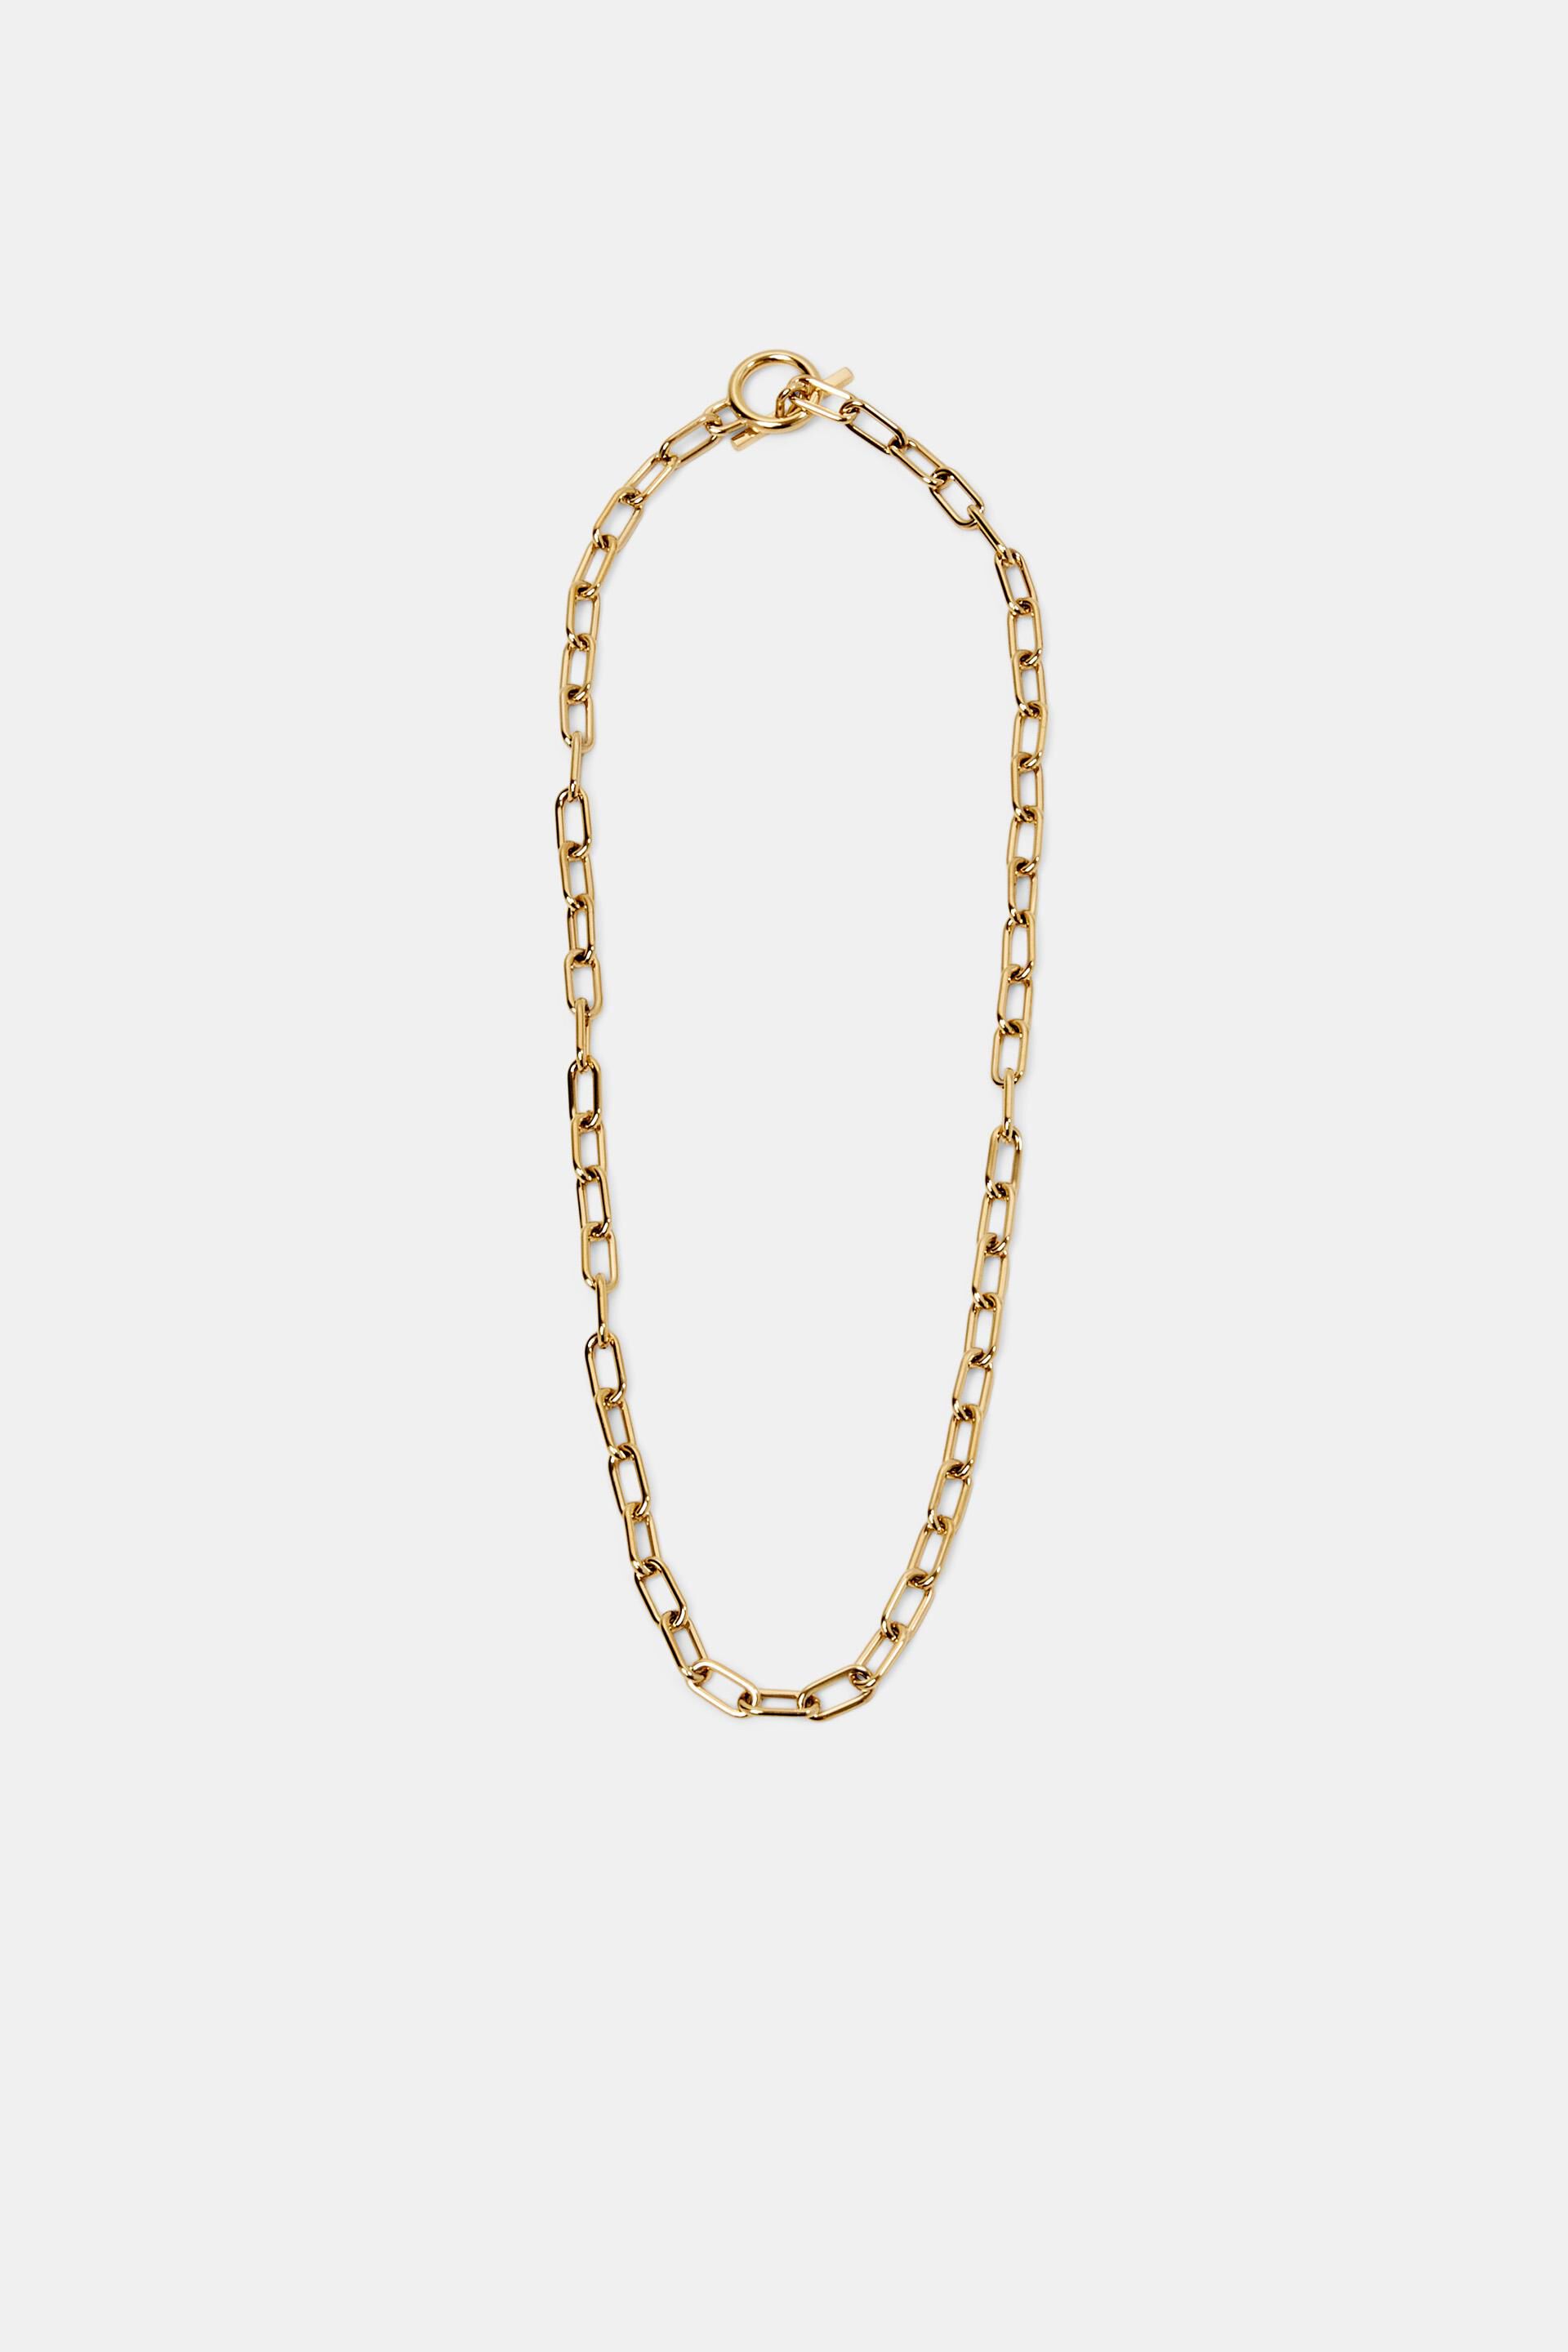 Esprit necklace, steel Chain stainless